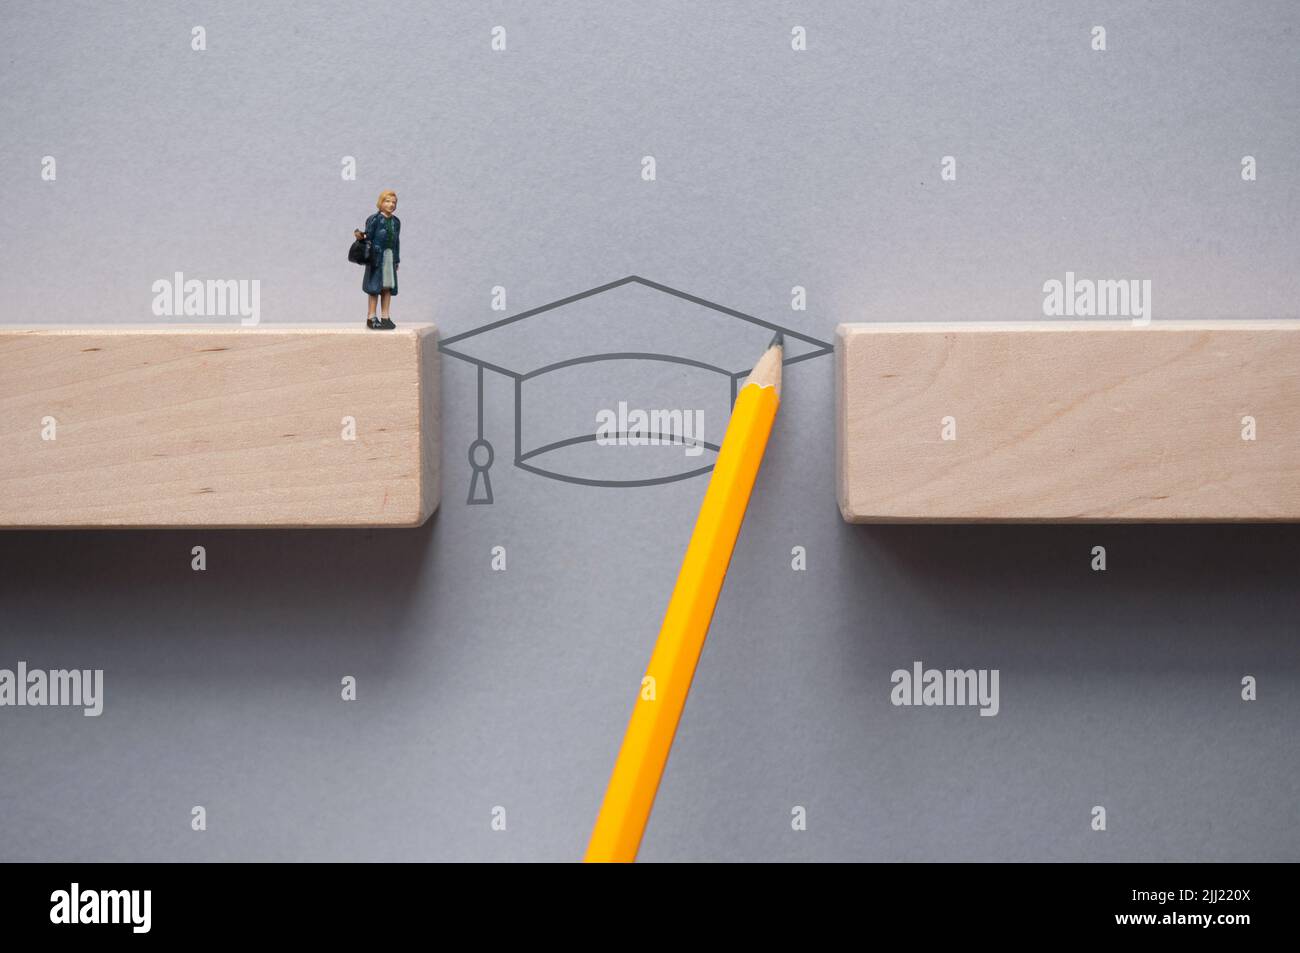 Pencil sketch with graduation hat bridging the gap between wooden blocks for female miniature figure to cross Stock Photo